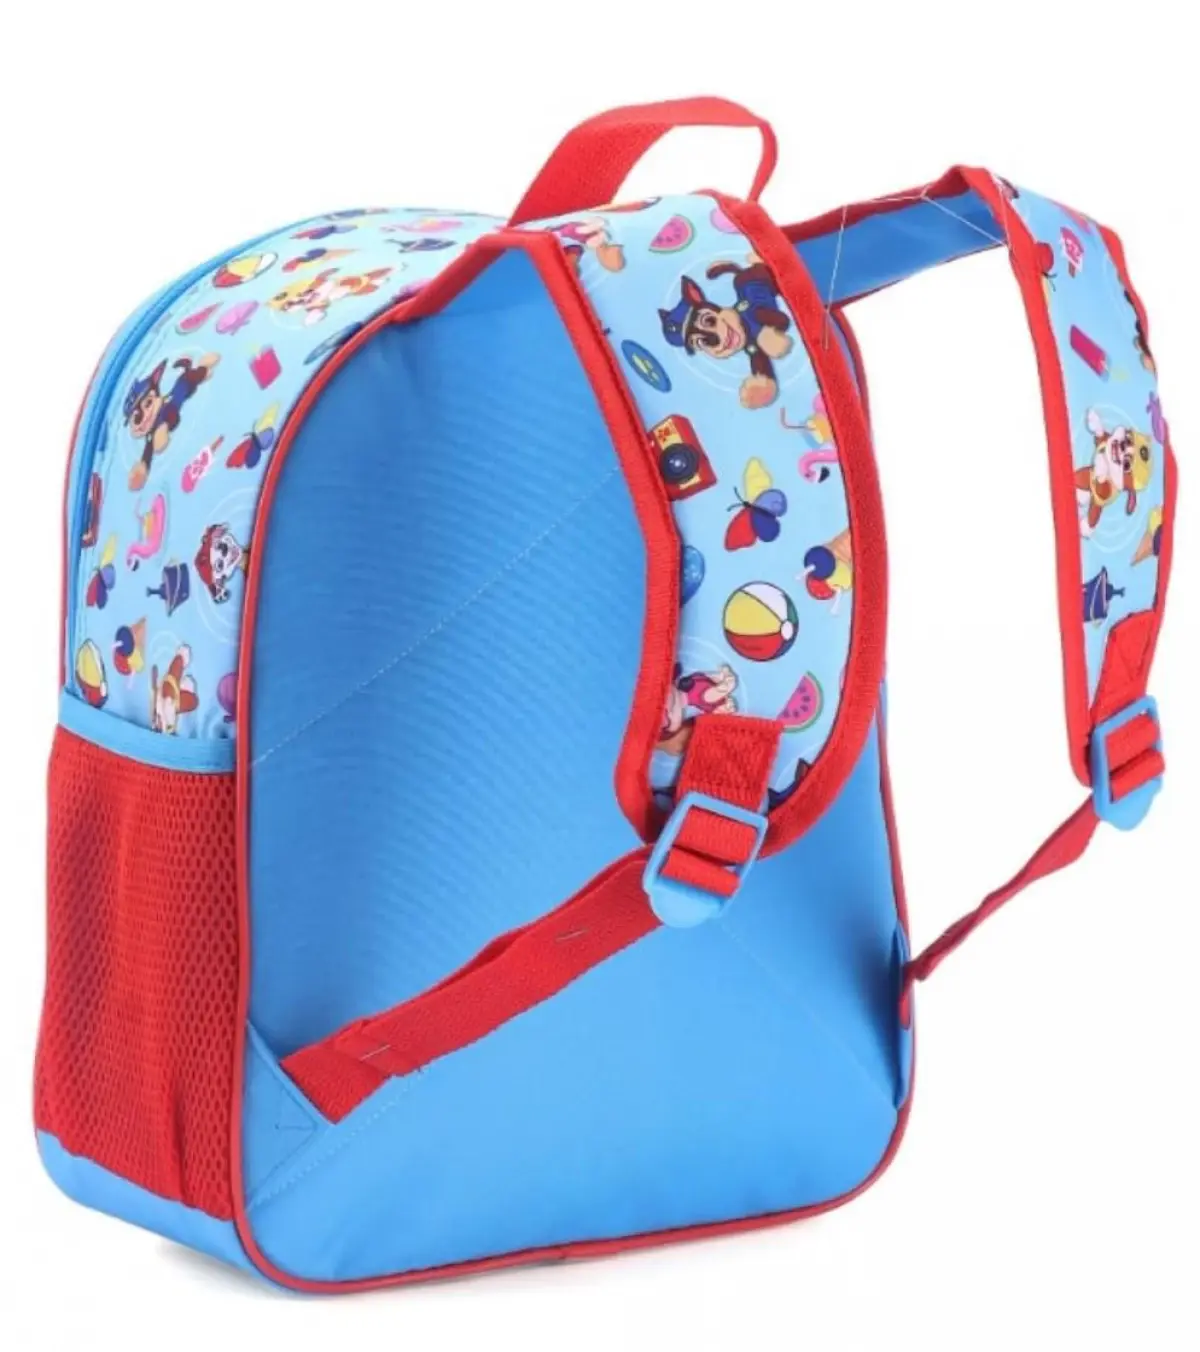 Striders 13 inches Paw Patrol-Inspired School Bag for Little Rescuers Paws and Adventures Multicolor For Kids Ages 2Y+